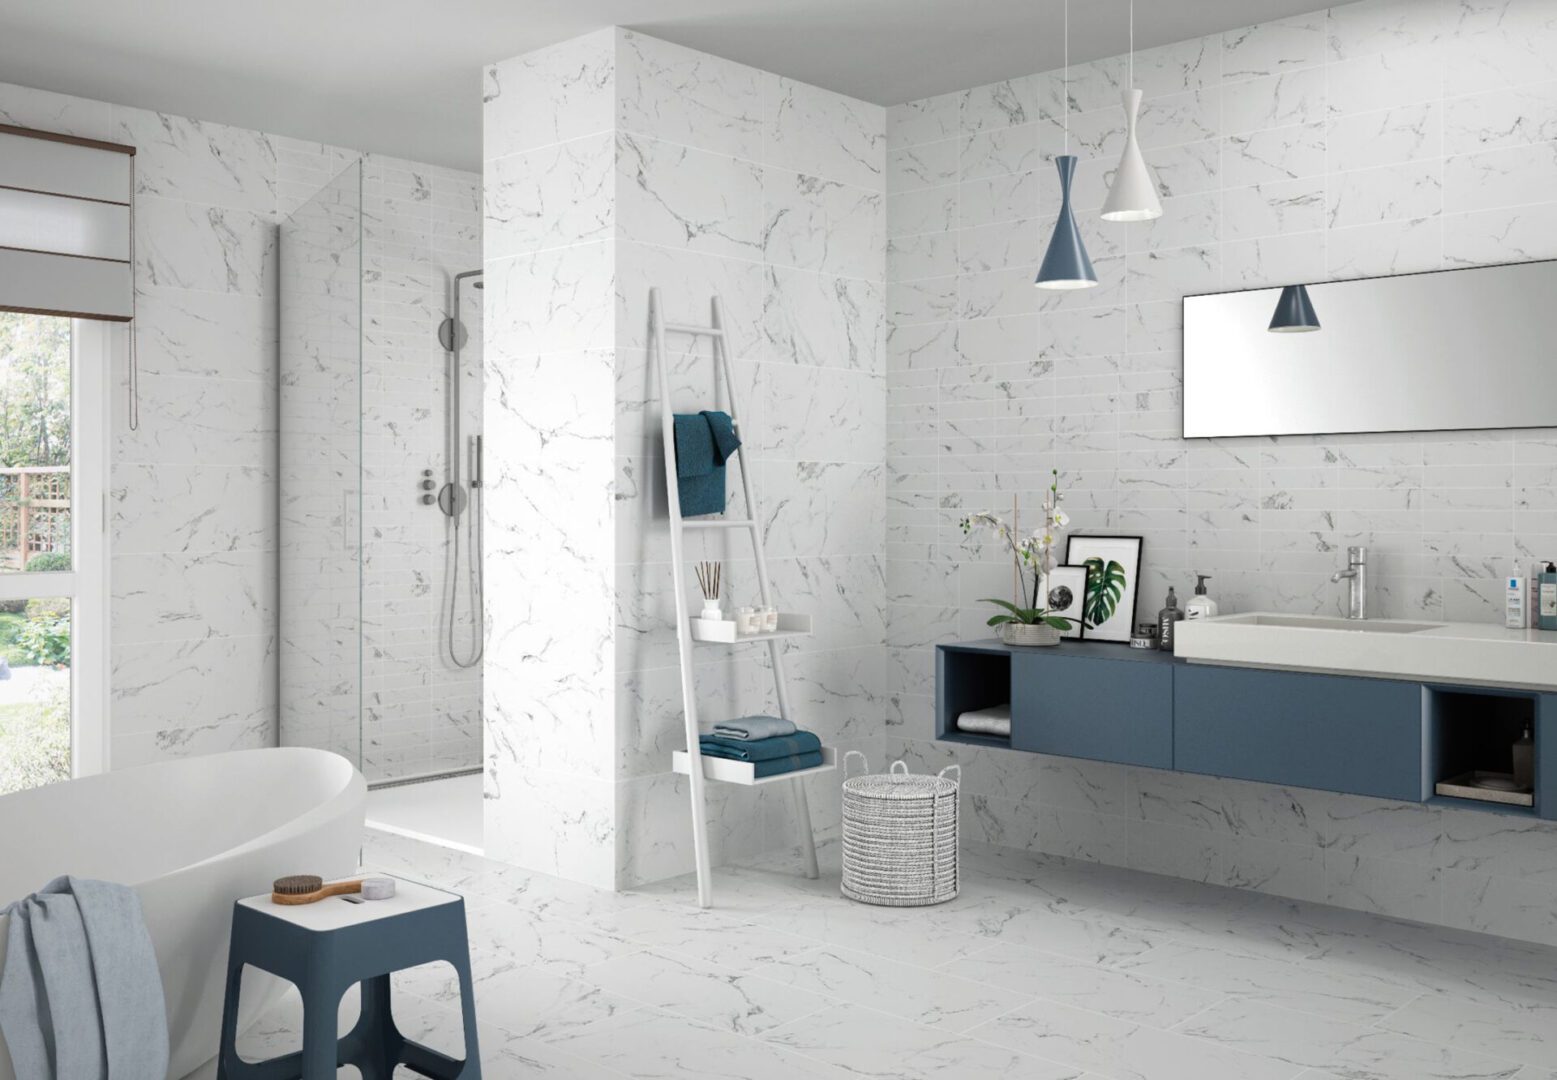 A bathroom with white walls and blue accents.